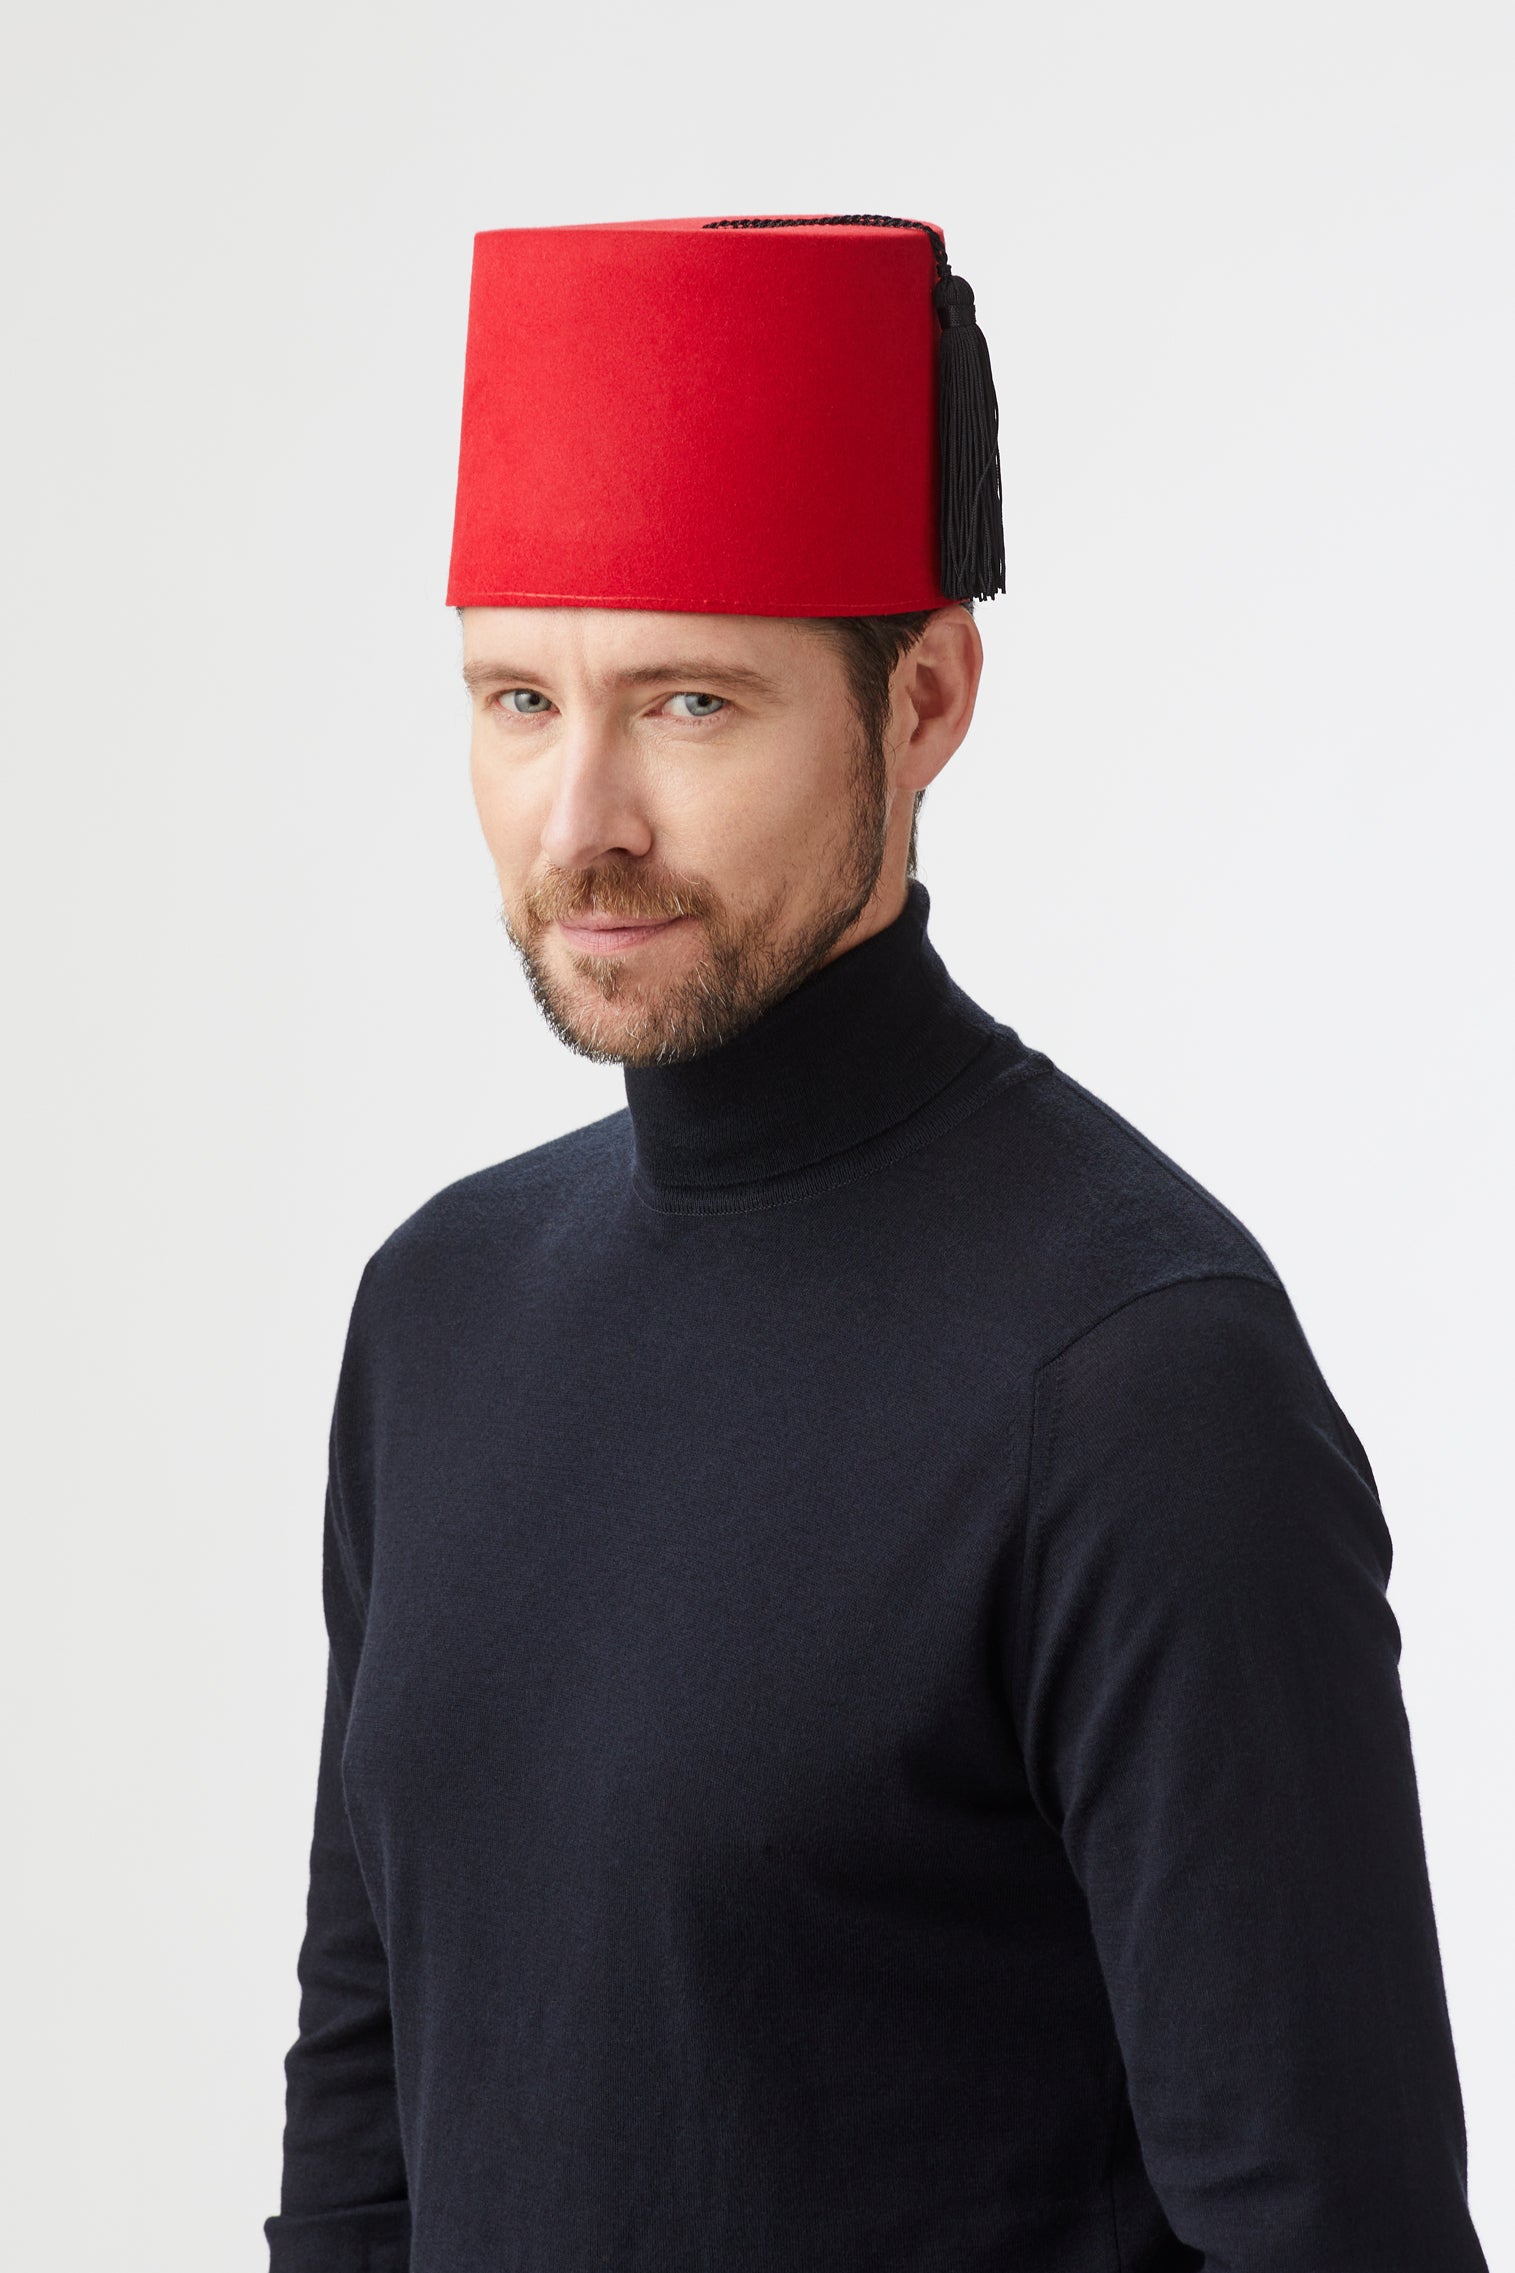 Fez - Valentines Day Gift Ideas - Lock & Co. Hatters London UK